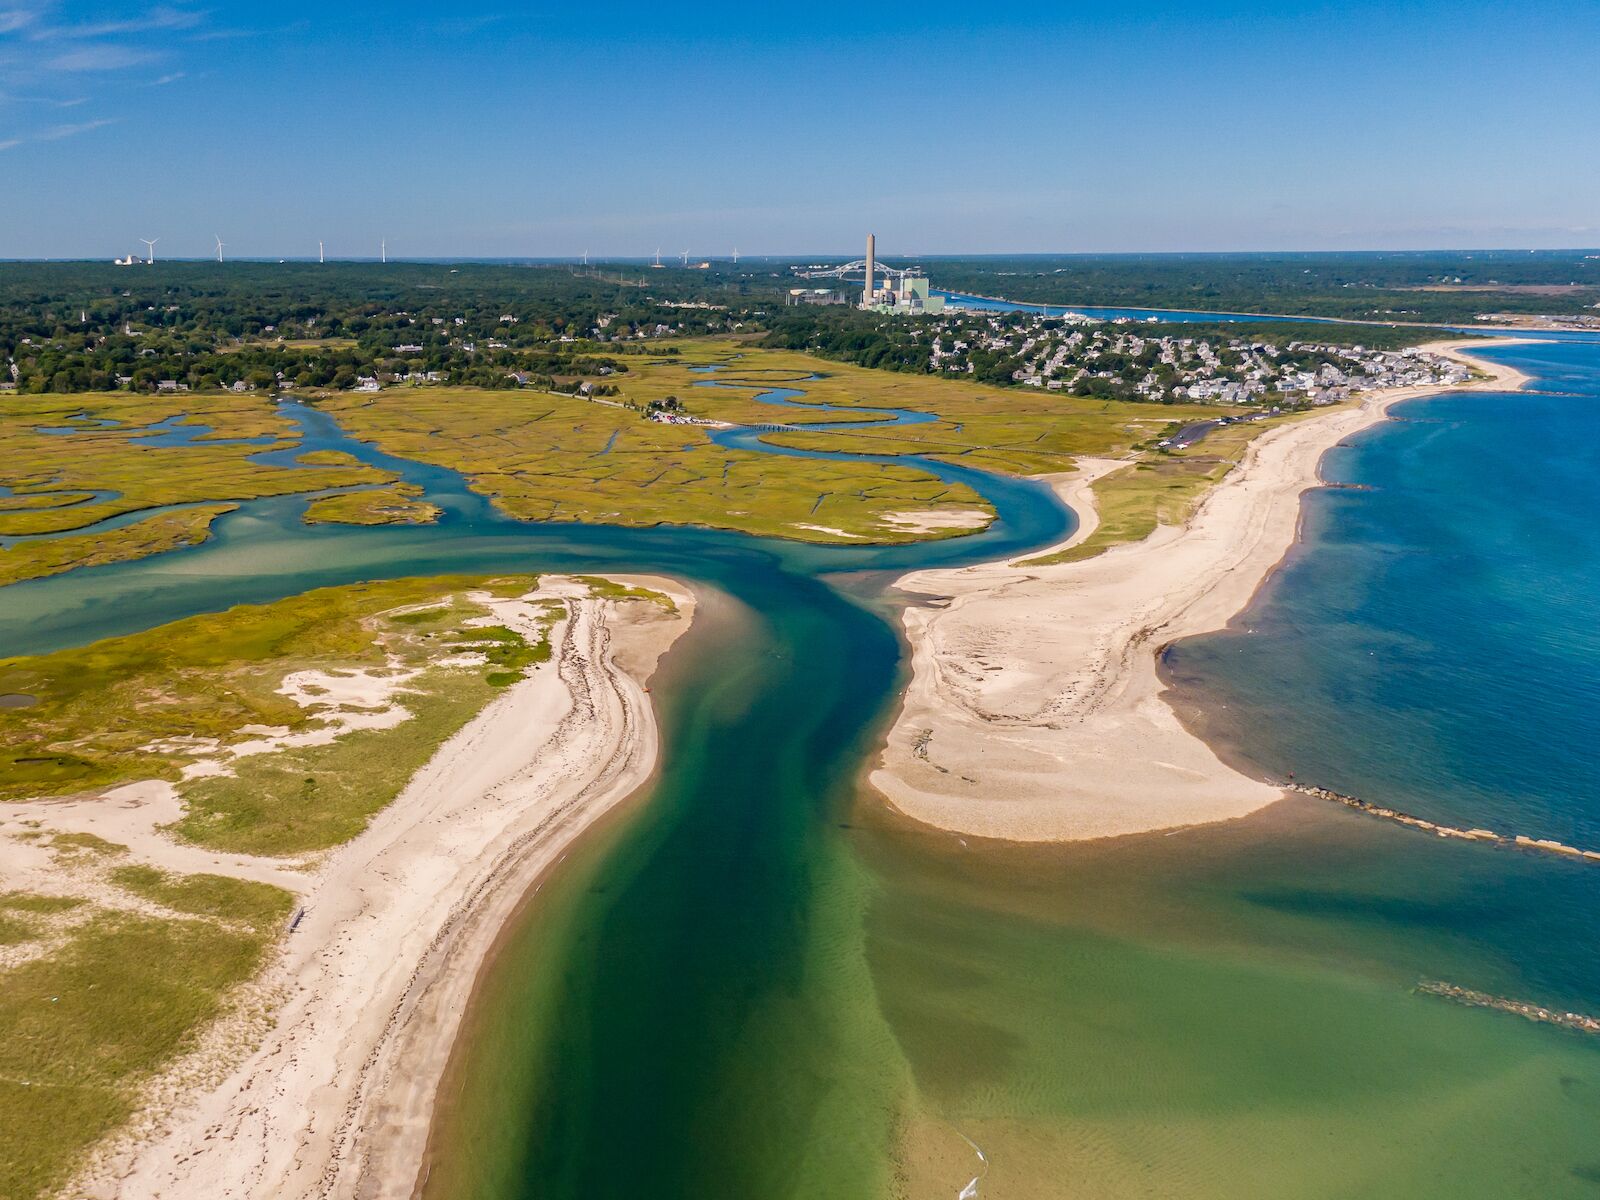 View of the Cape Cod town of Sandwich from the air